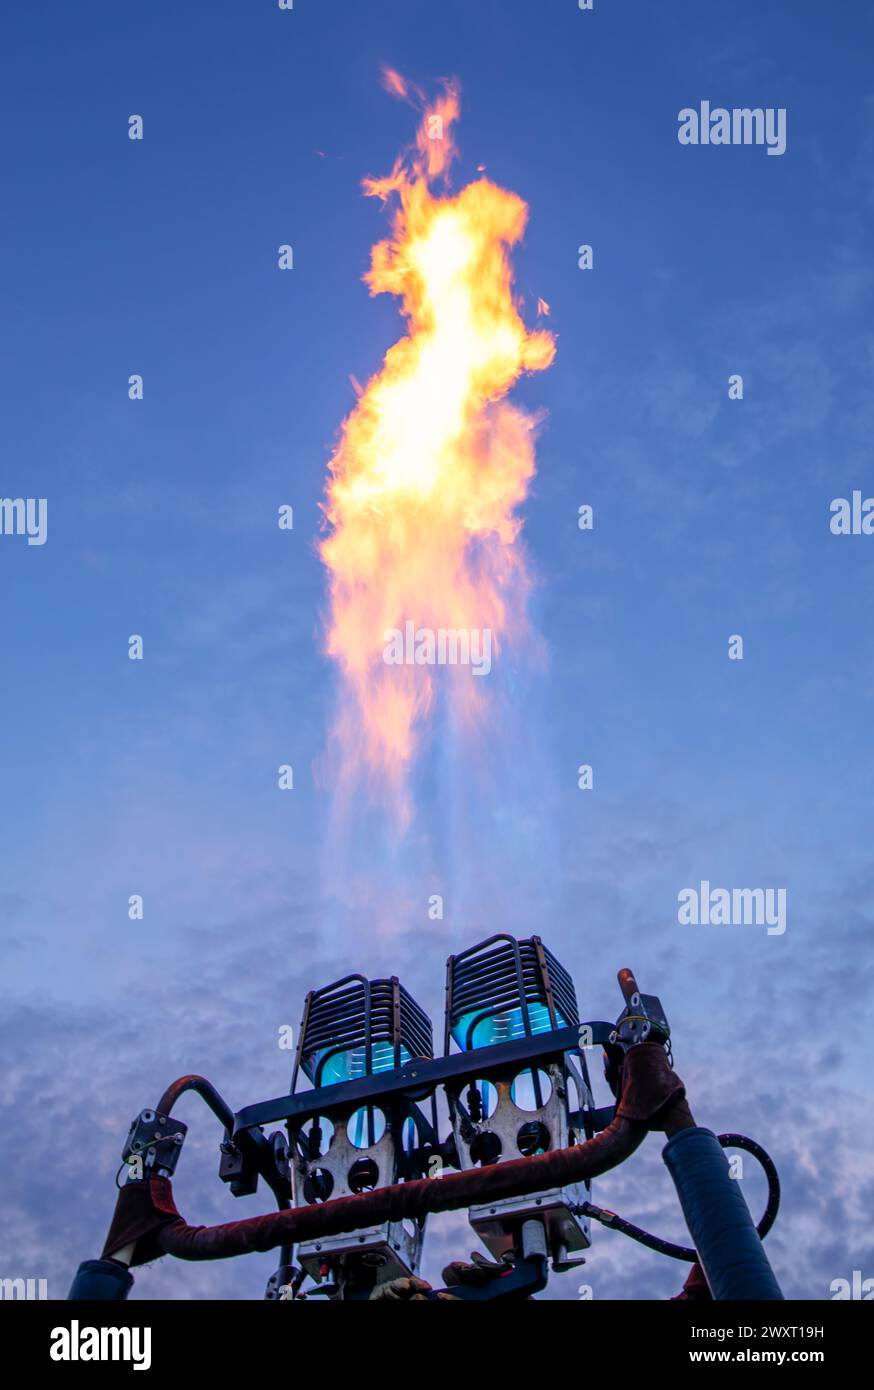 Ethereal Flames: Gas Burner Fire Illuminating the Evening Sky Stock Photo